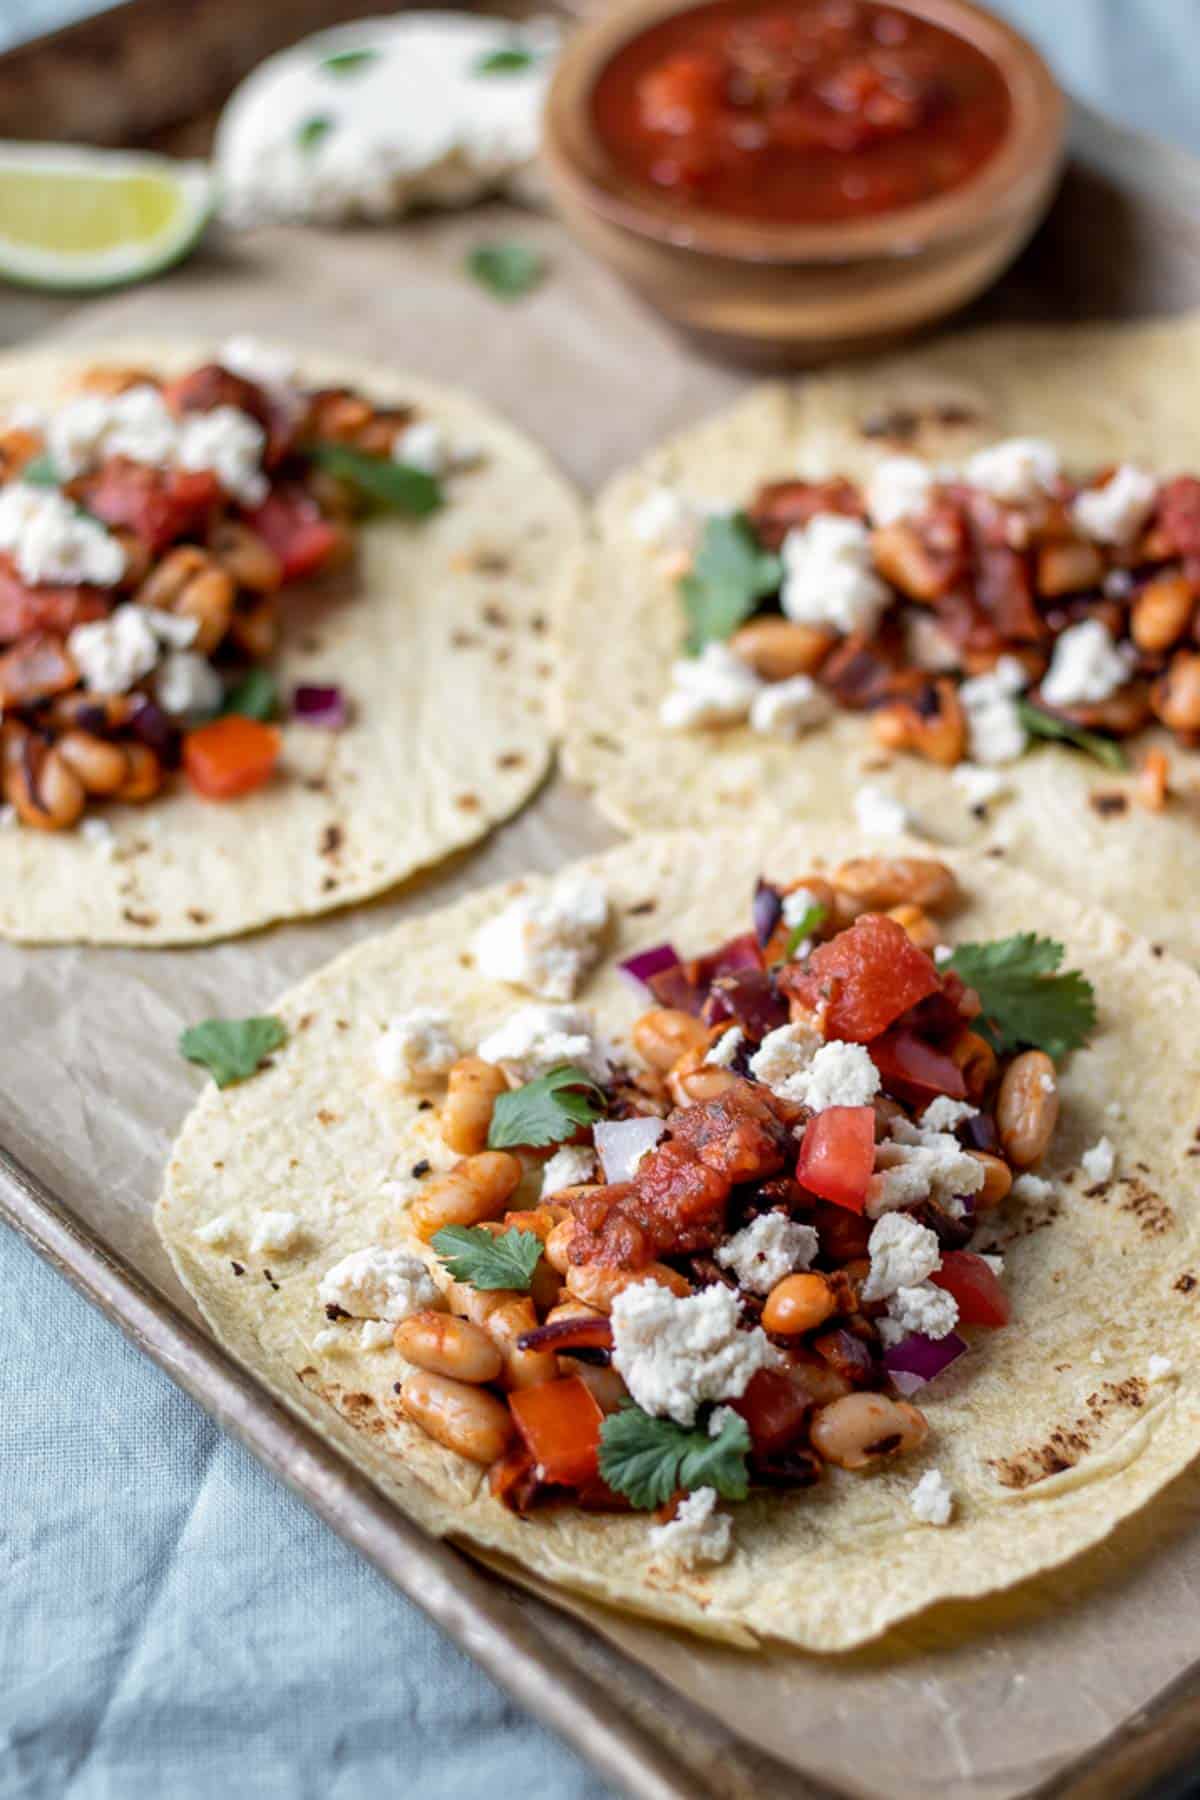 White bean tacos on corn-flour tortillas with cheese and salsa.